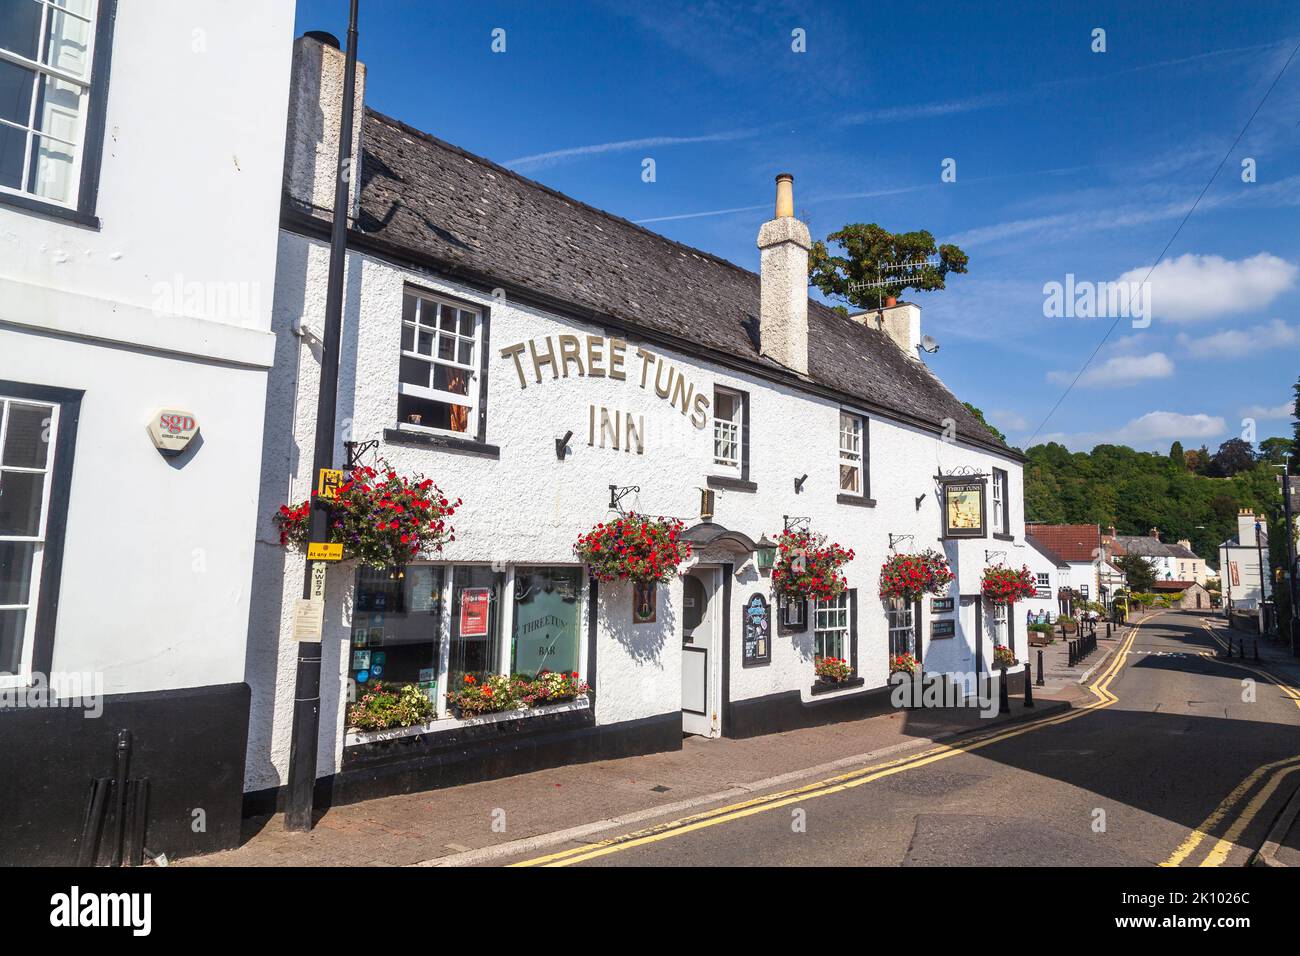 The Three Tuns Inn, on Castle Terrace, Chepstow, Monmouthshire, Galles, REGNO UNITO Foto Stock